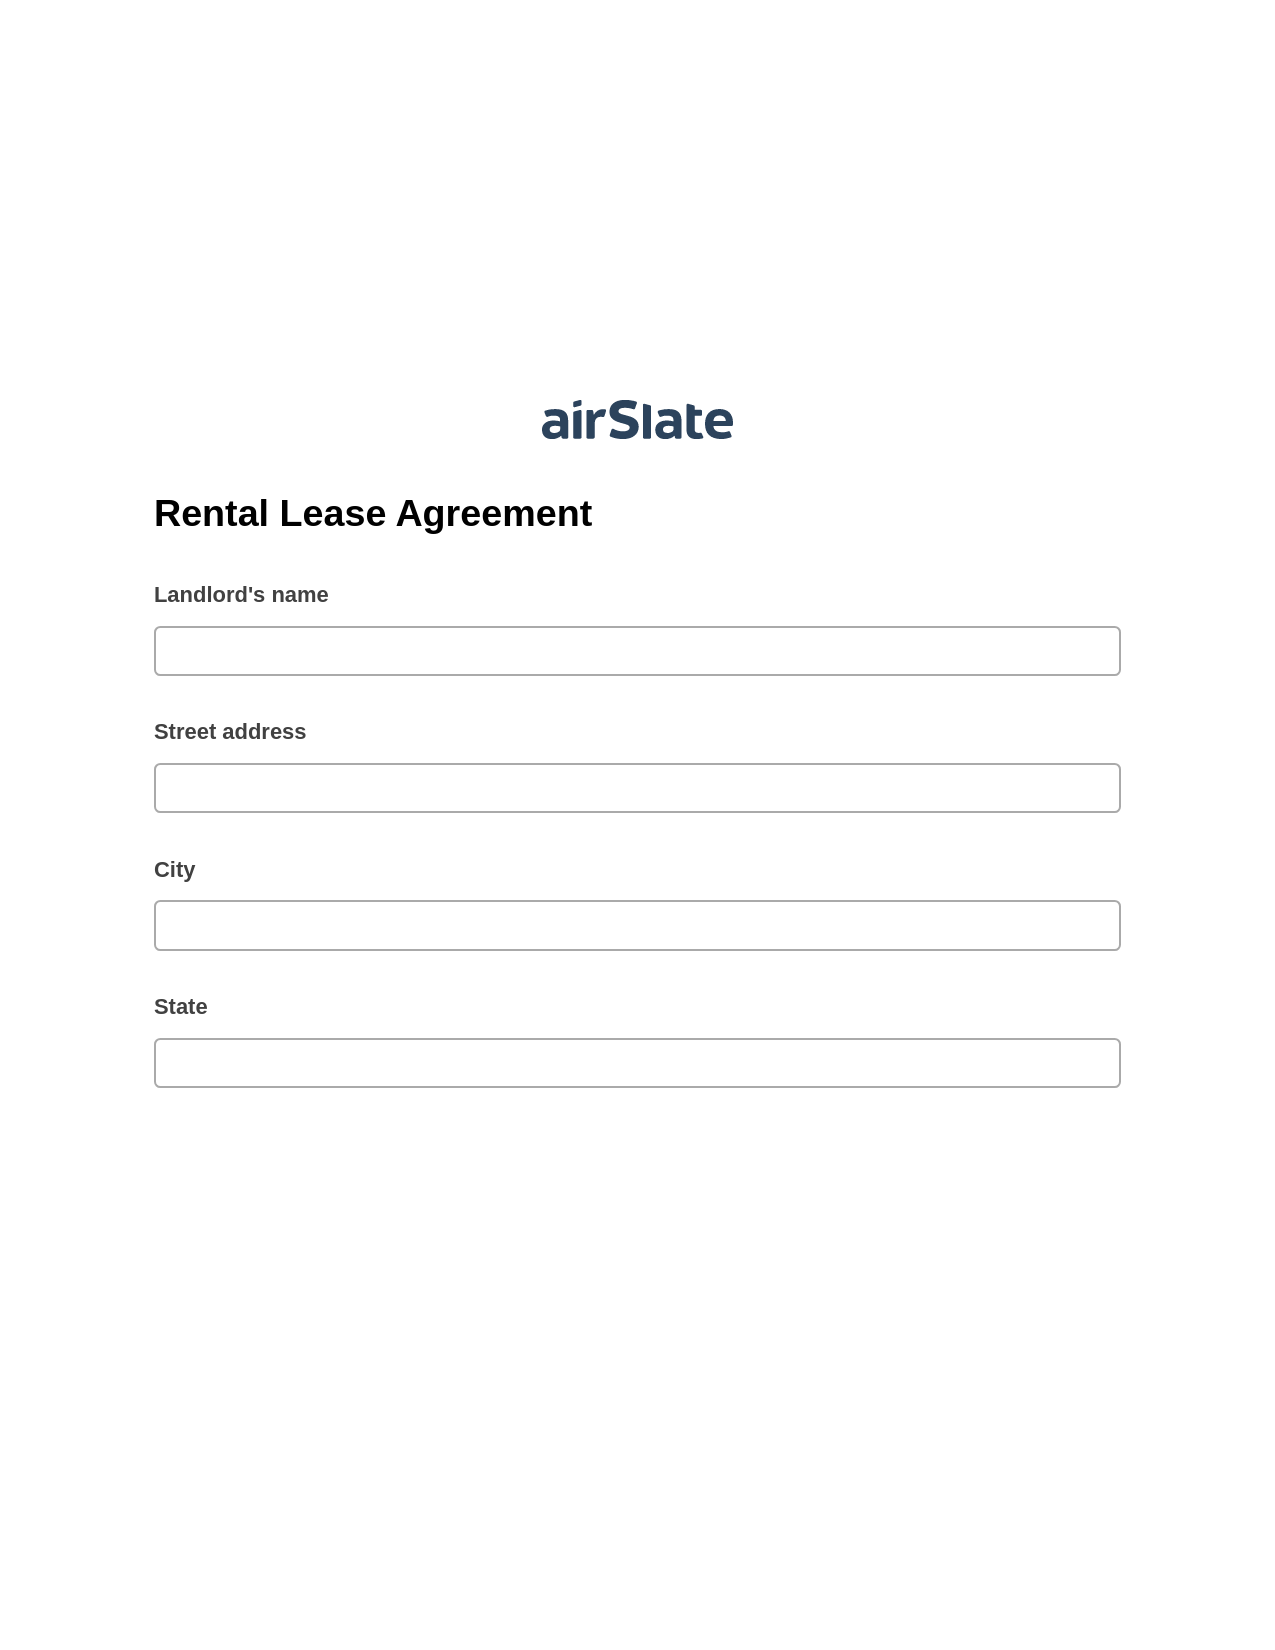 Rental Lease Agreement Pre-fill from CSV File Dropdown Options Bot, Create Slate every Google Sheet Update Bot, Export to MySQL Bot